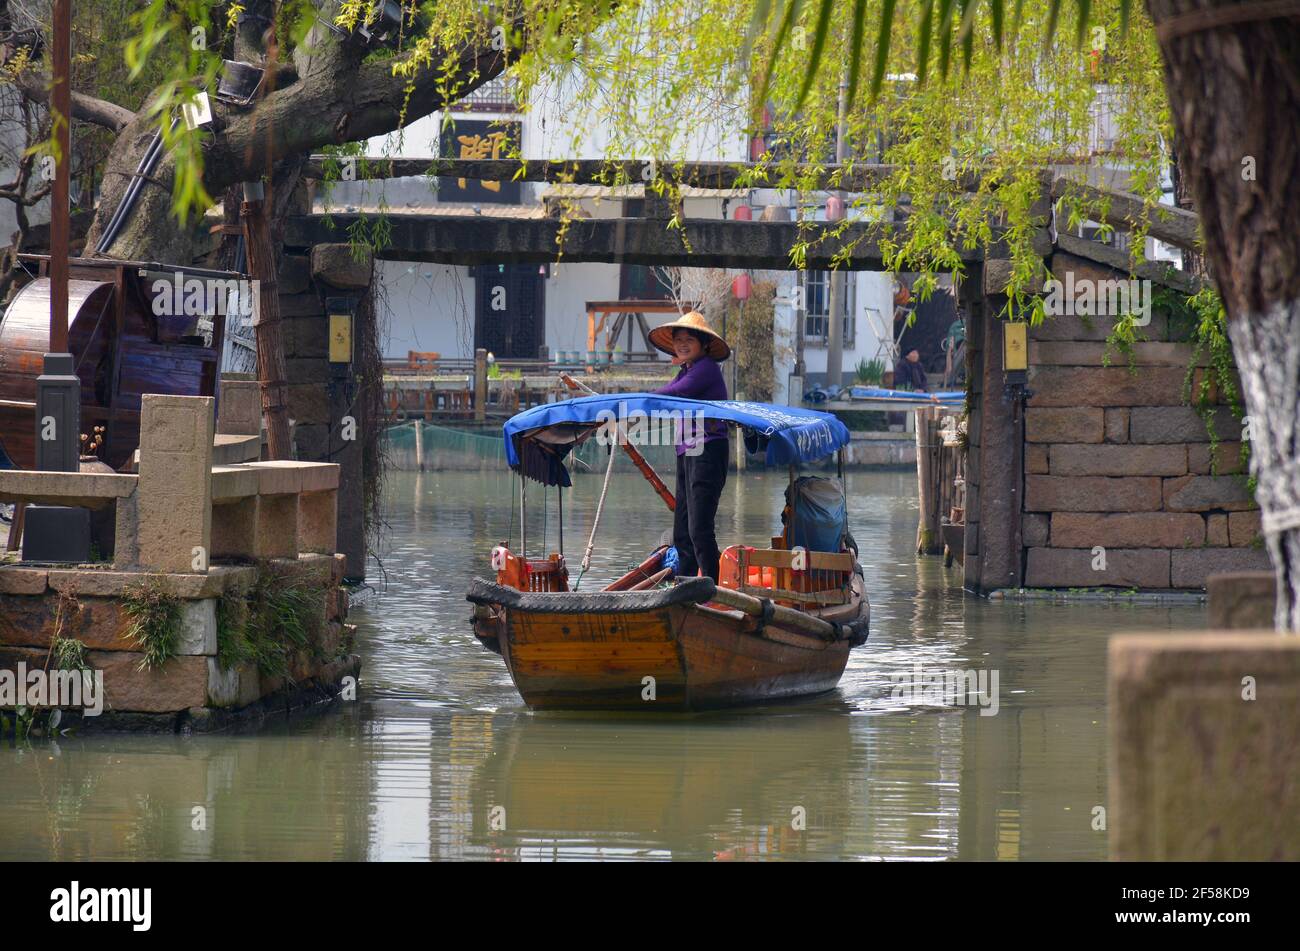 A lady navigates her tourist boat through the waterway of the top rated Chinese scenic area of Zhouzhuang in Jiangsu province. Stock Photo